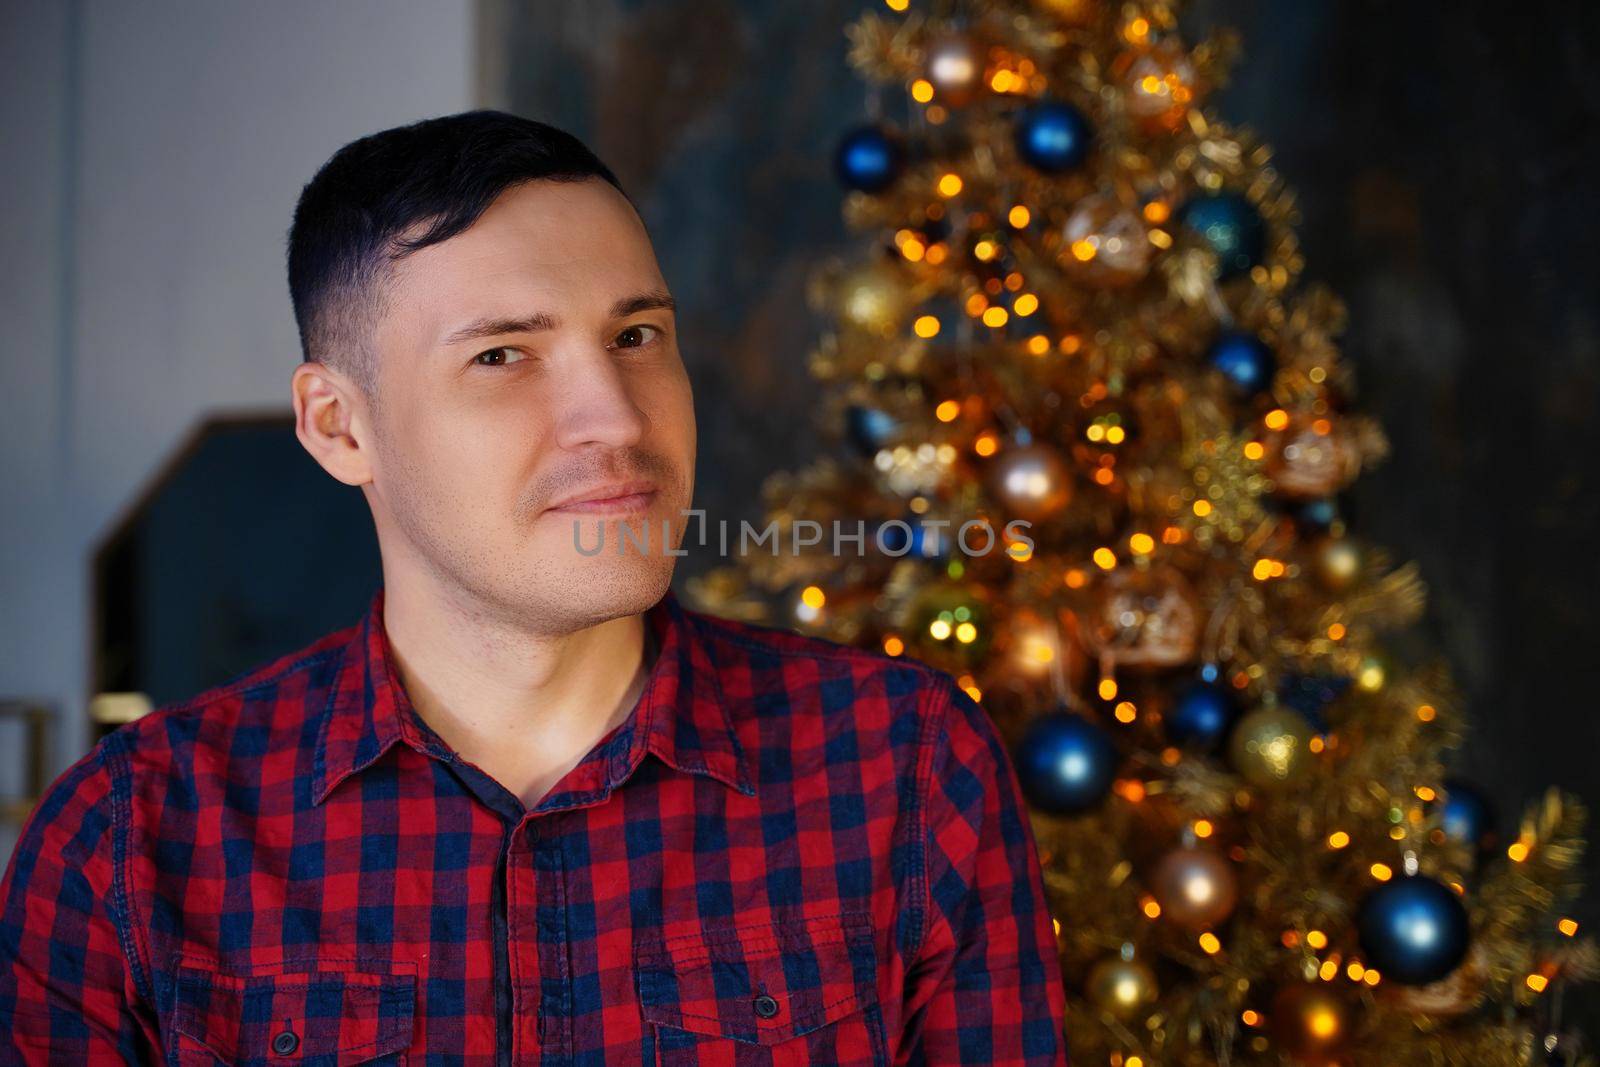 Young handsome man in plaid shirt on background of Christmas tree. Adult attractive male posing at coniferous tree with decorative adornments. Concept of Christmas celebration at home